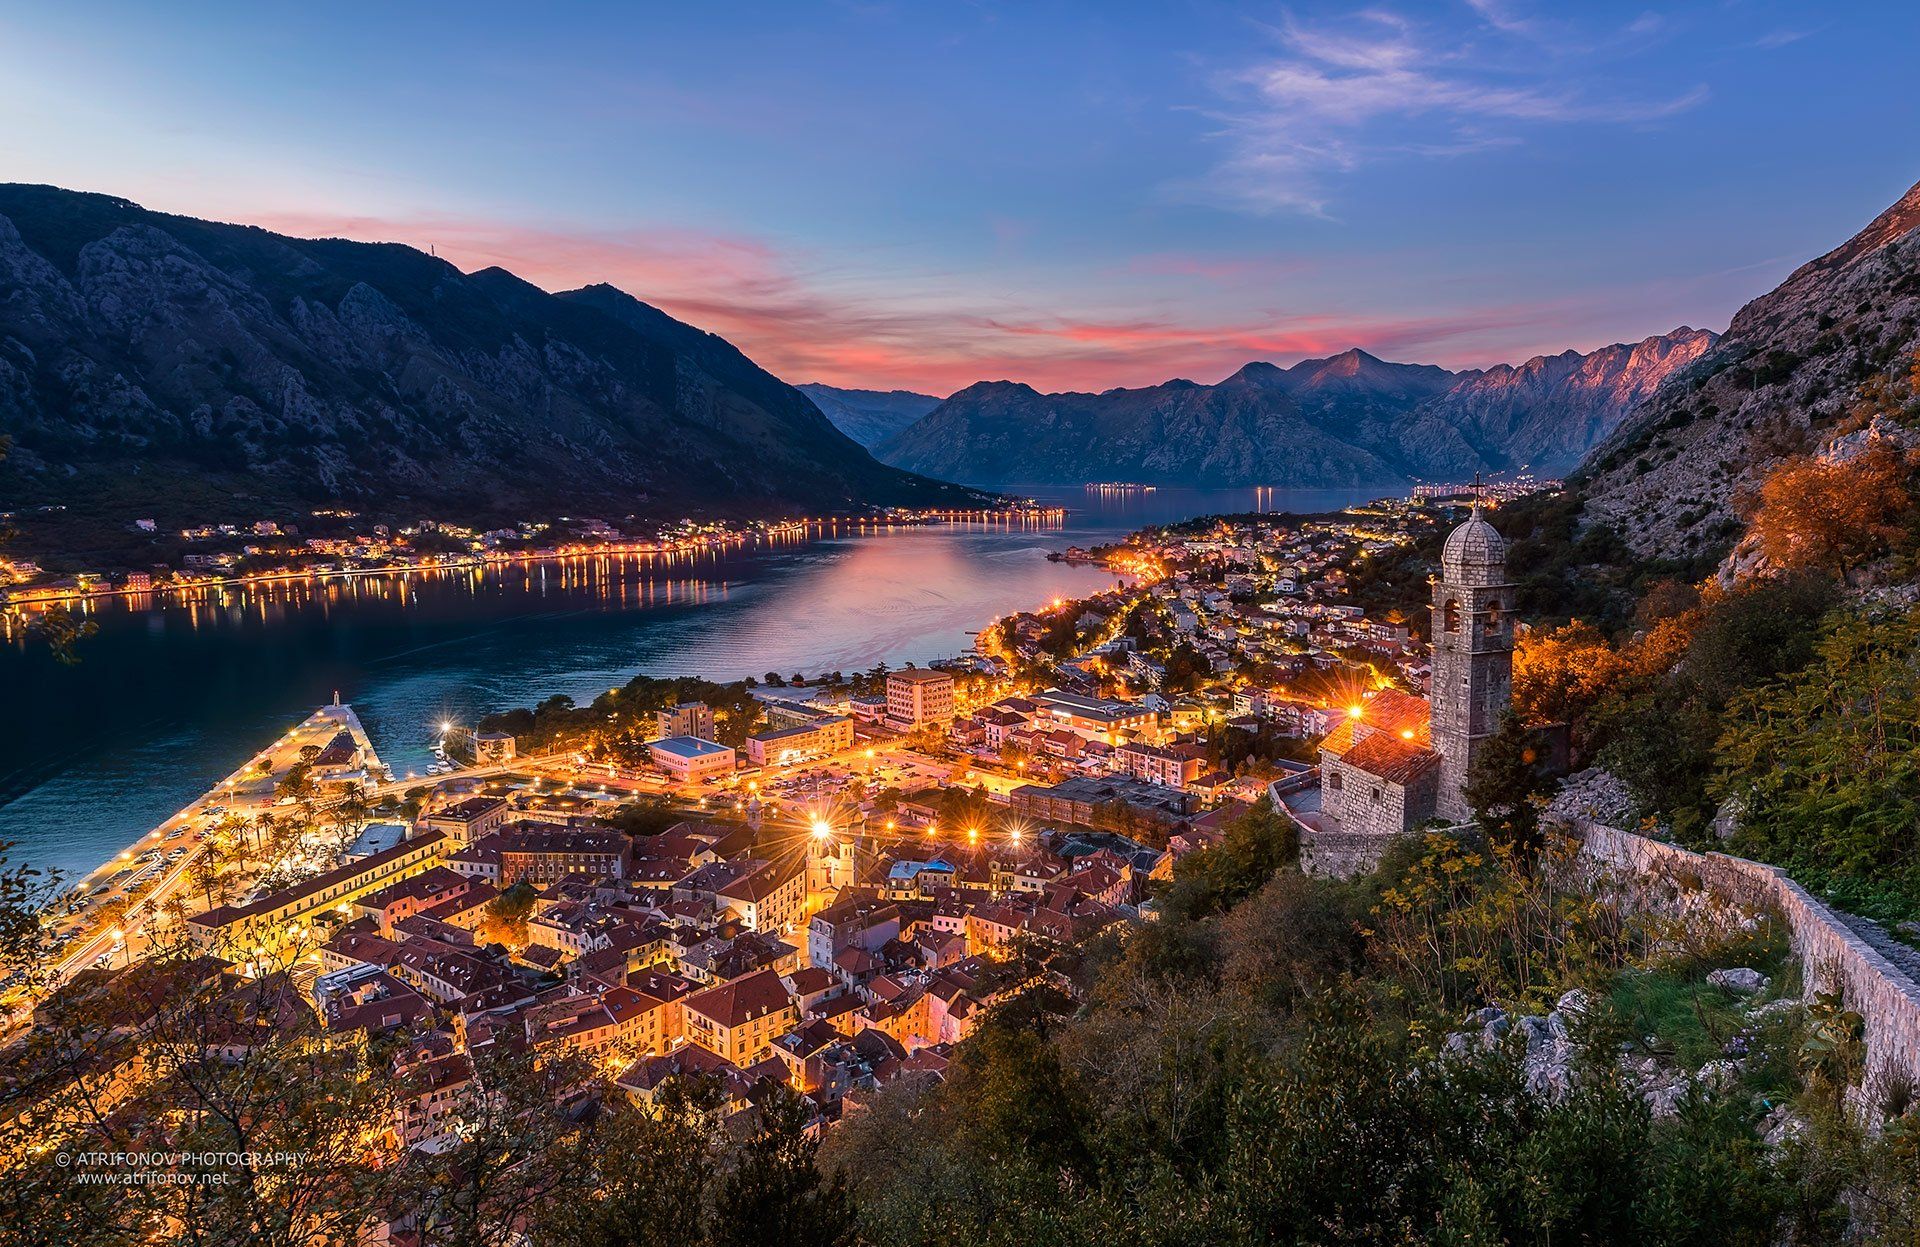 Kotor, Montenegro, Kotor bay, town, adriatic sea, lights, night, sunset, church, fortress, ancient, mountain, Andrey Trifonov